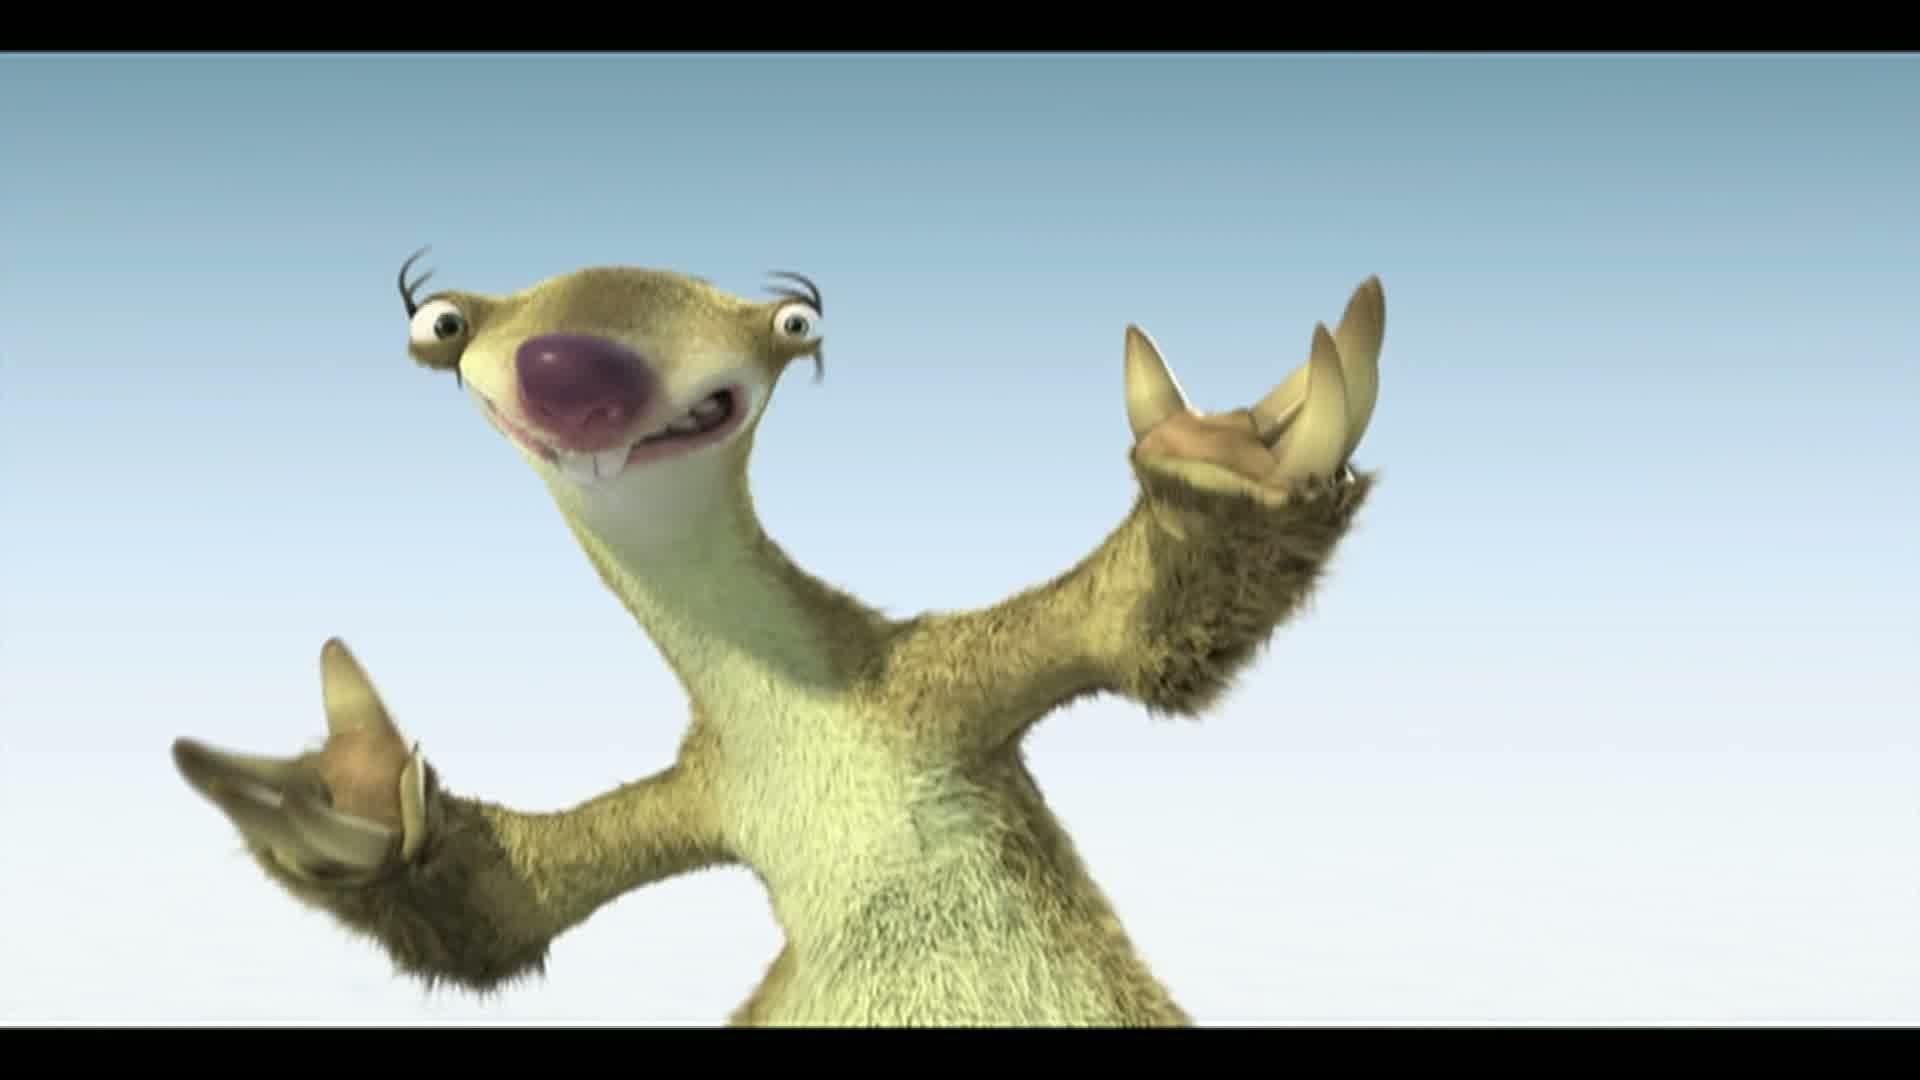 Sid eggcarrying sloth sid from the Ice Age series 4K wallpaper download